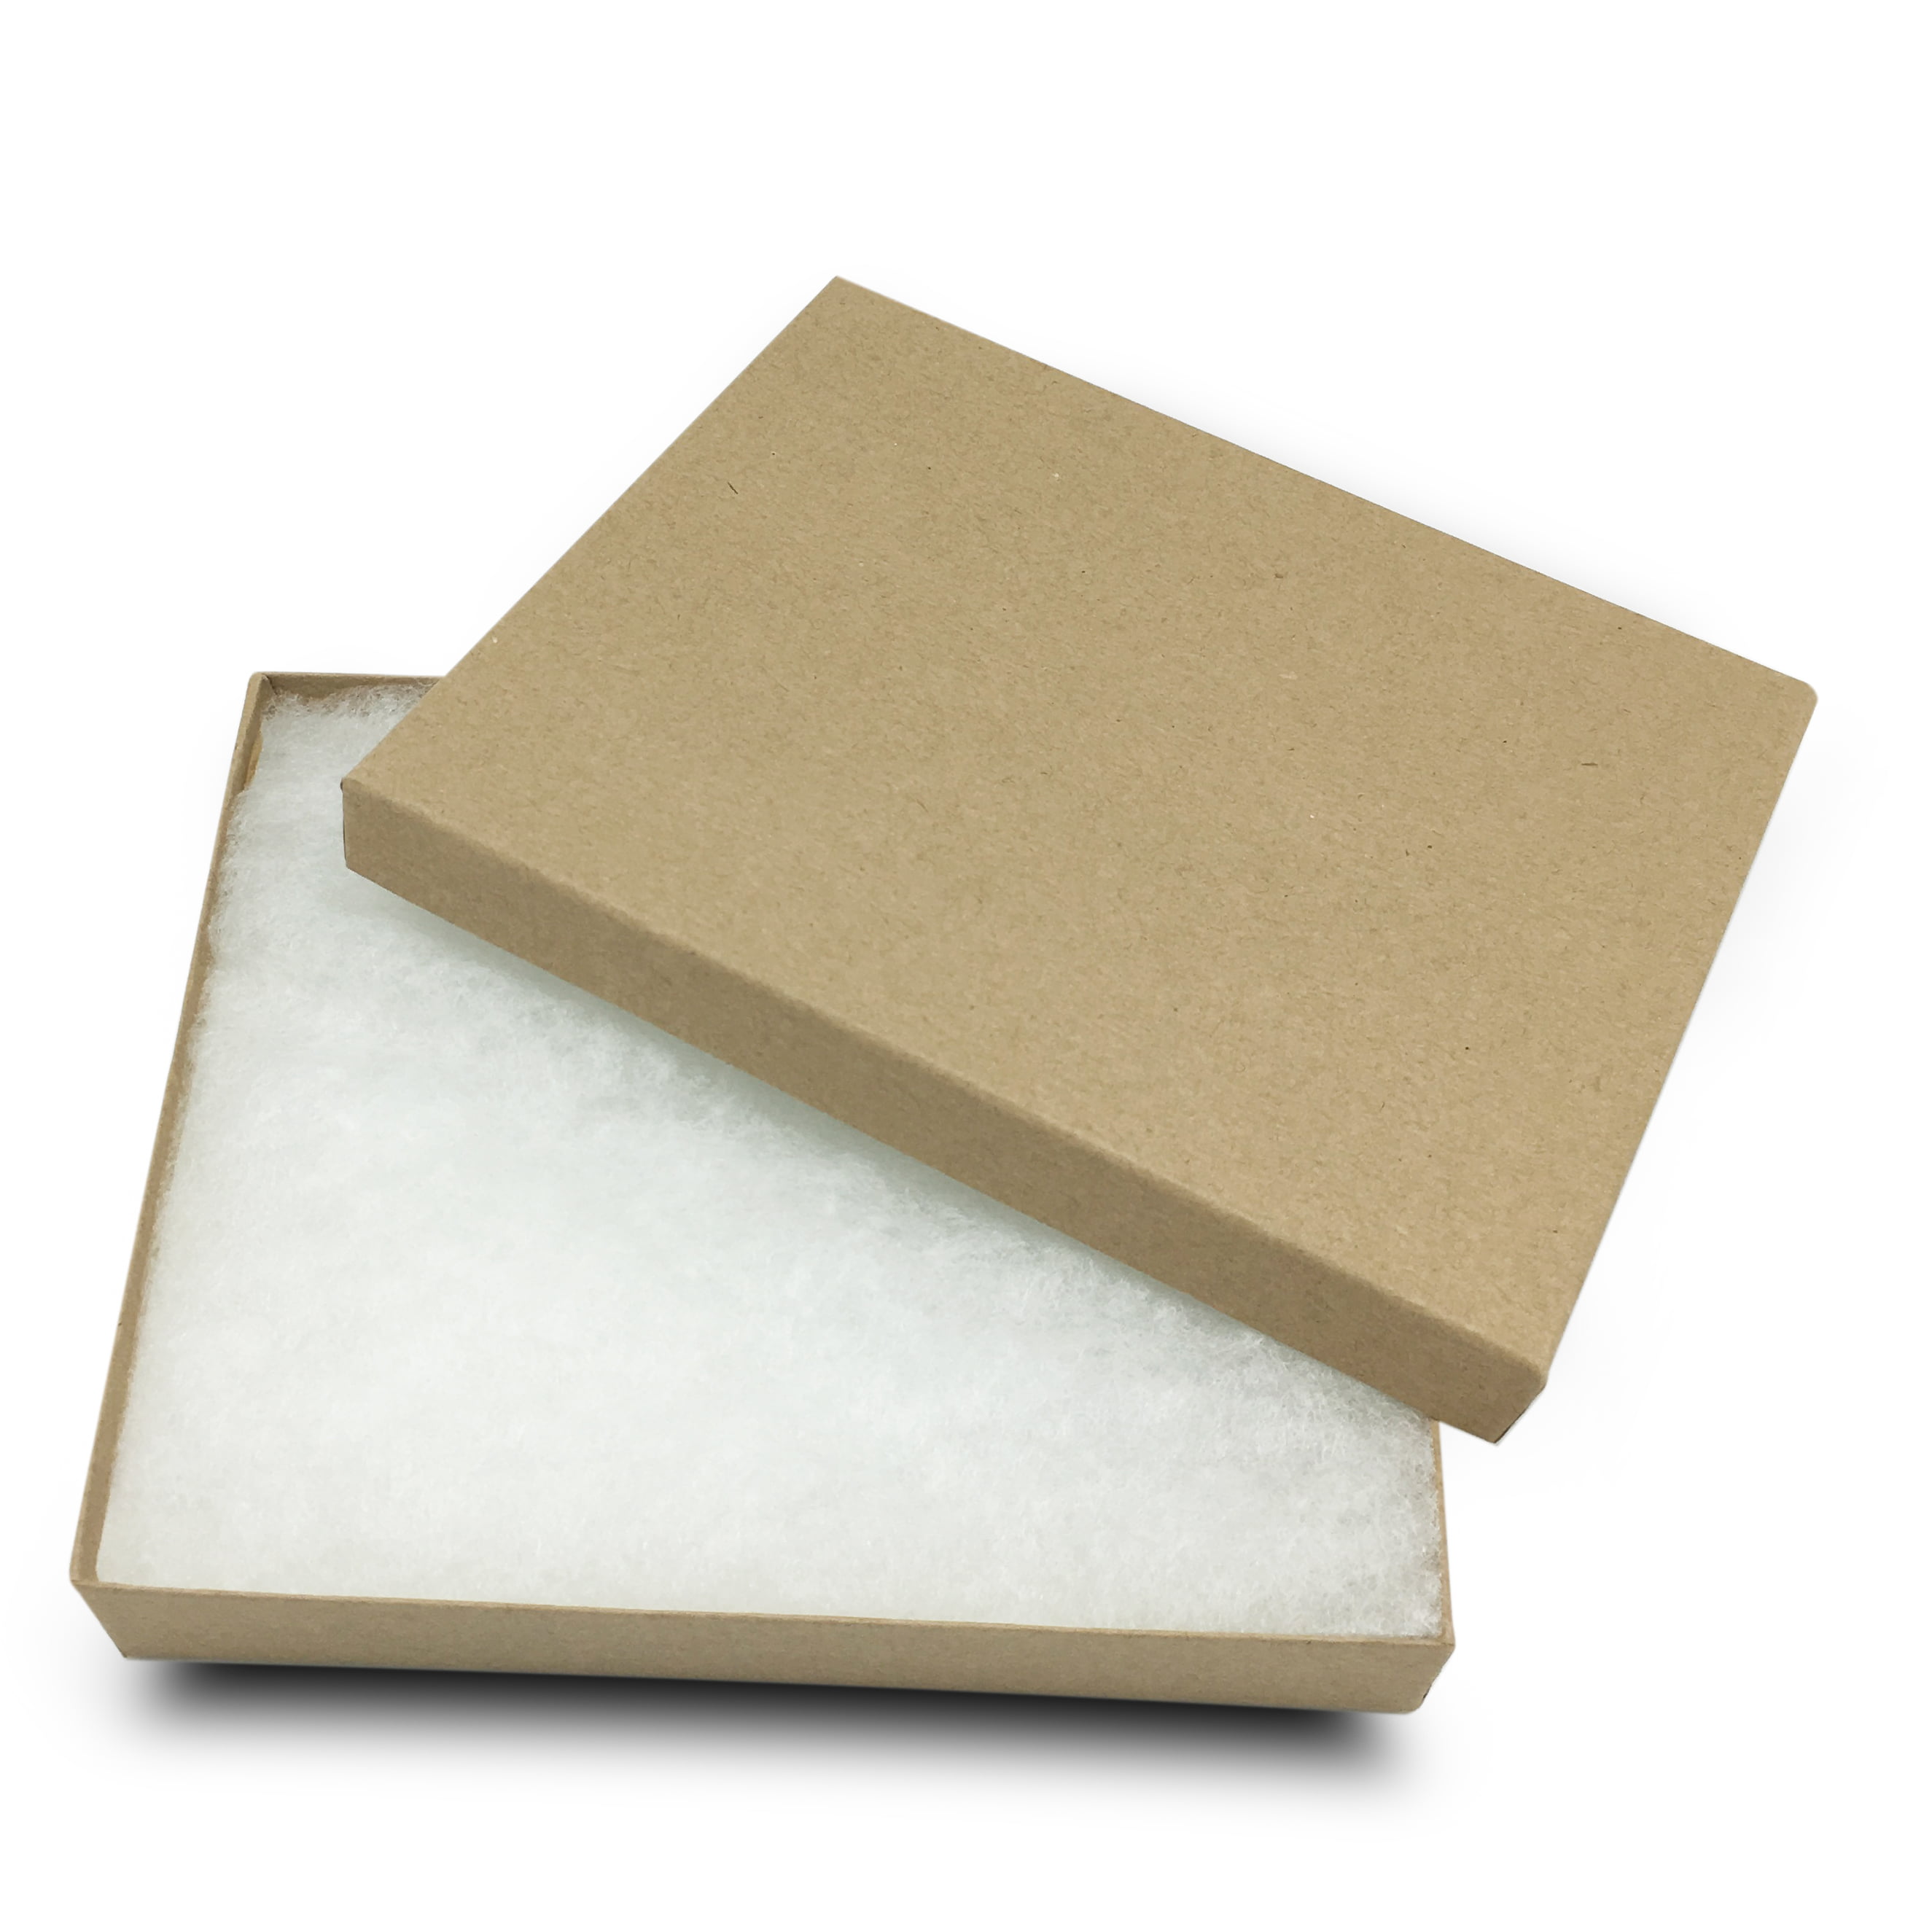 The Display Guys Pack of 25 Cotton Filled Cardboard Paper Kraft Jewelry Box Gift Case Kraft 7 1/8x5 1/8x1 1/8 inches #75 